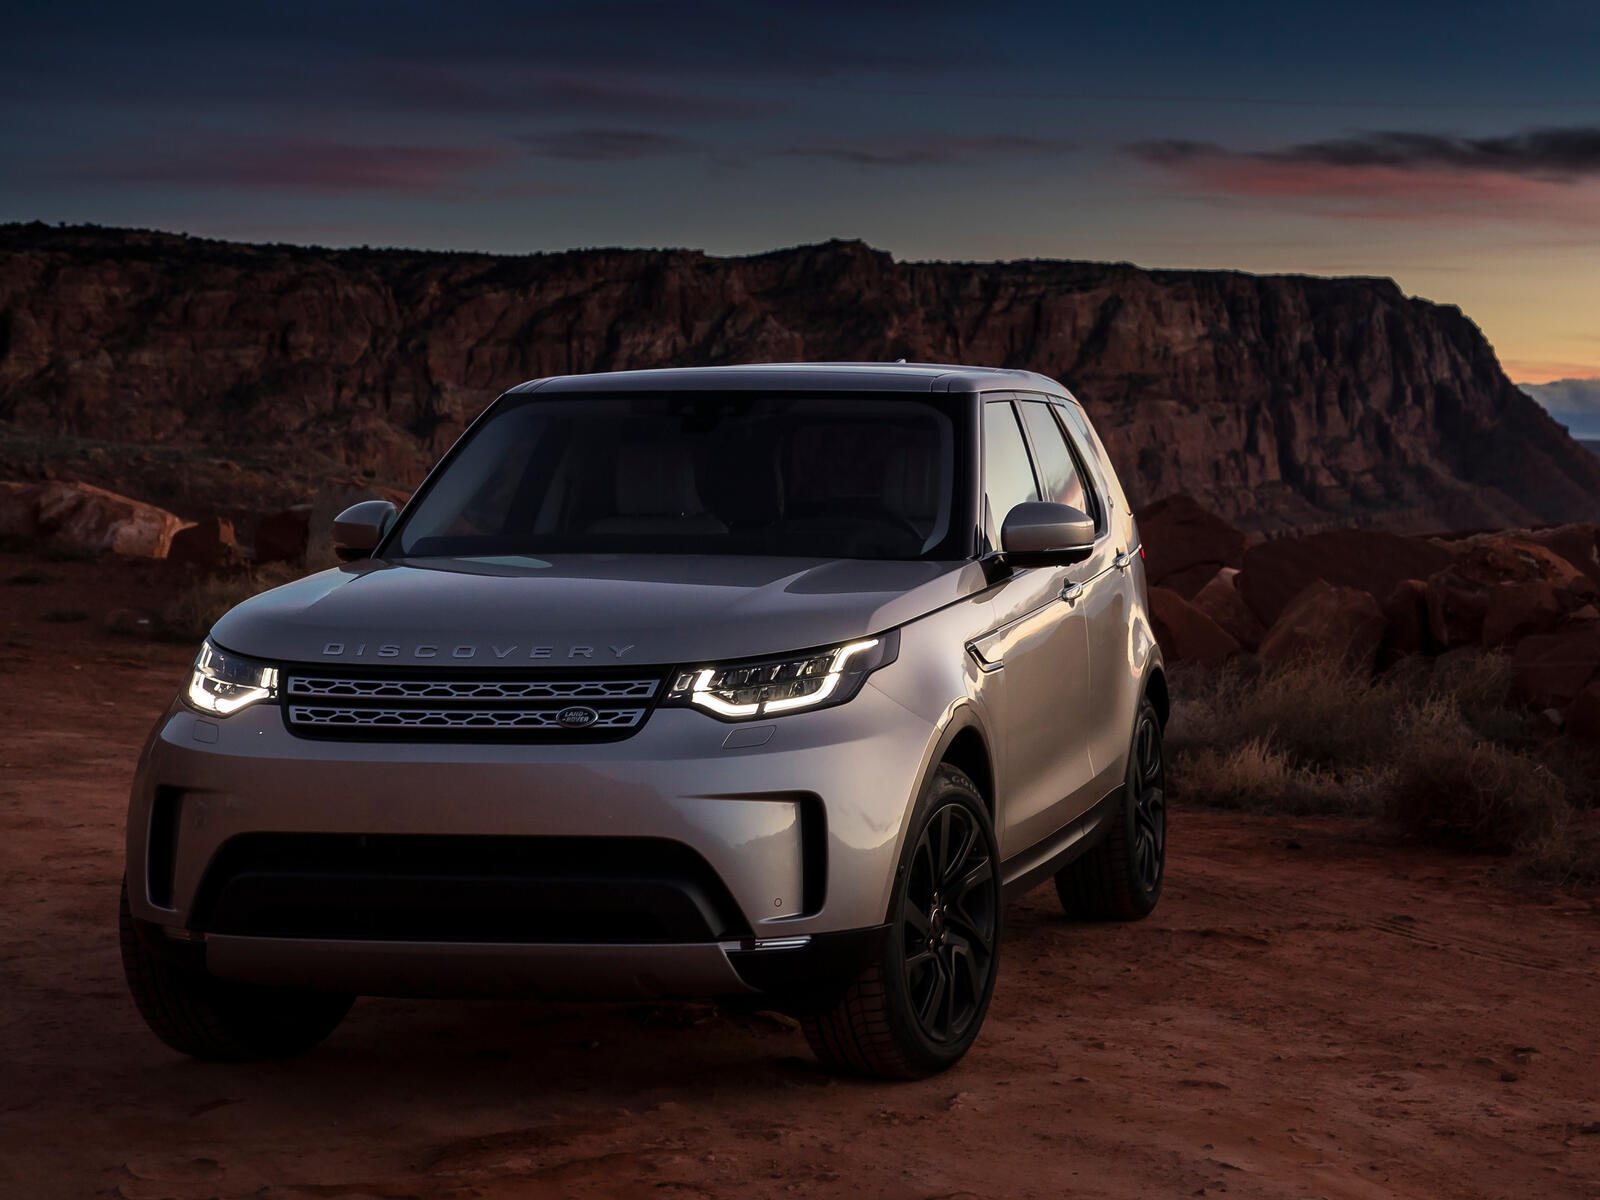 Wallpapers Land Rover 2017 cars cars on the desktop